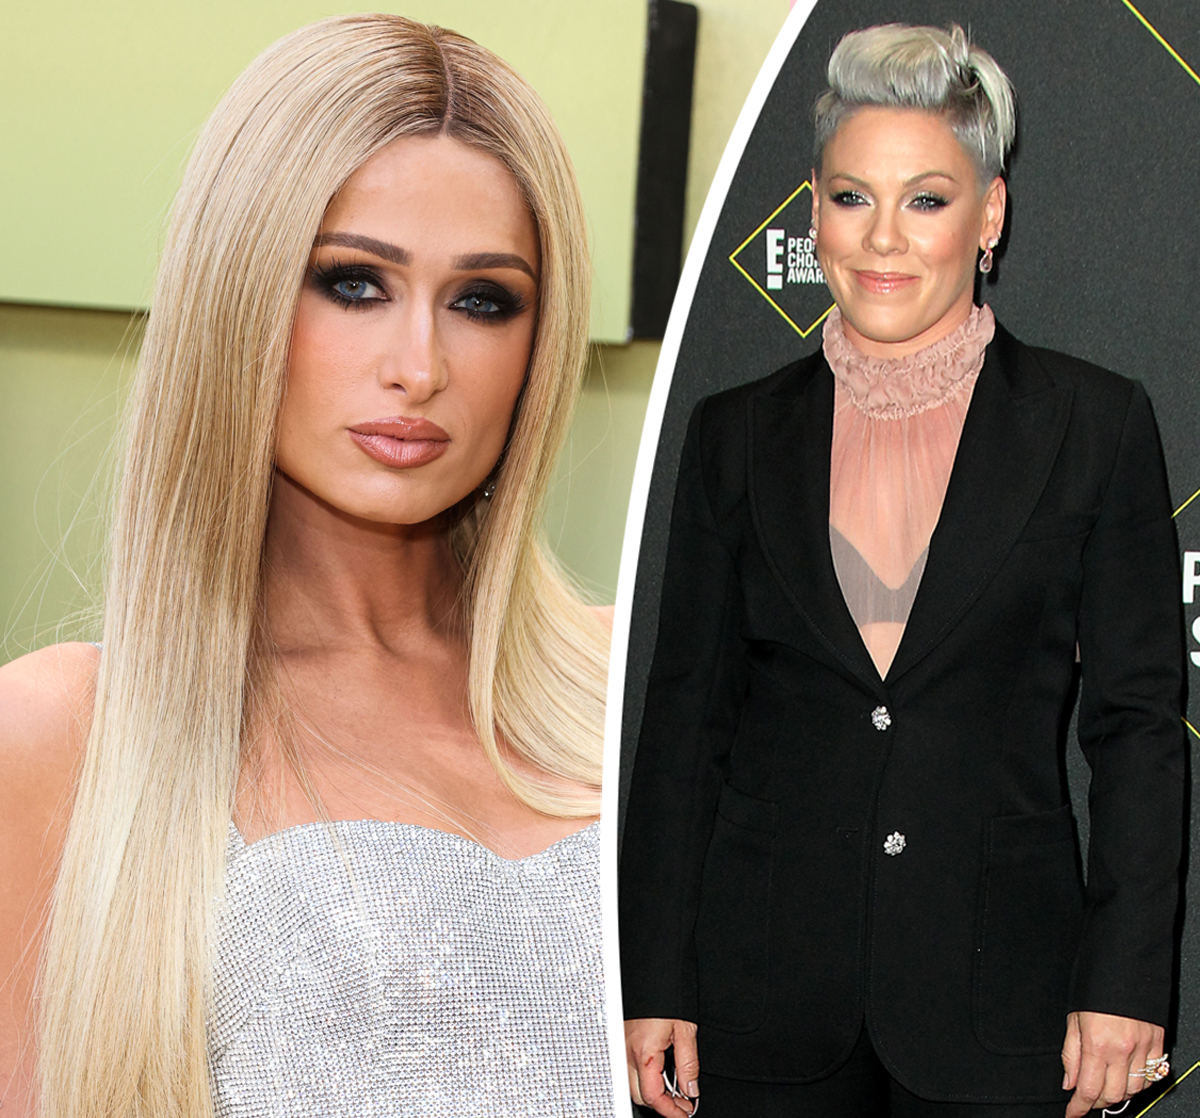 Paris Hilton Reveals The Moment She Felt Shamed By Pink Amid Sex Tape Fallout! image pic